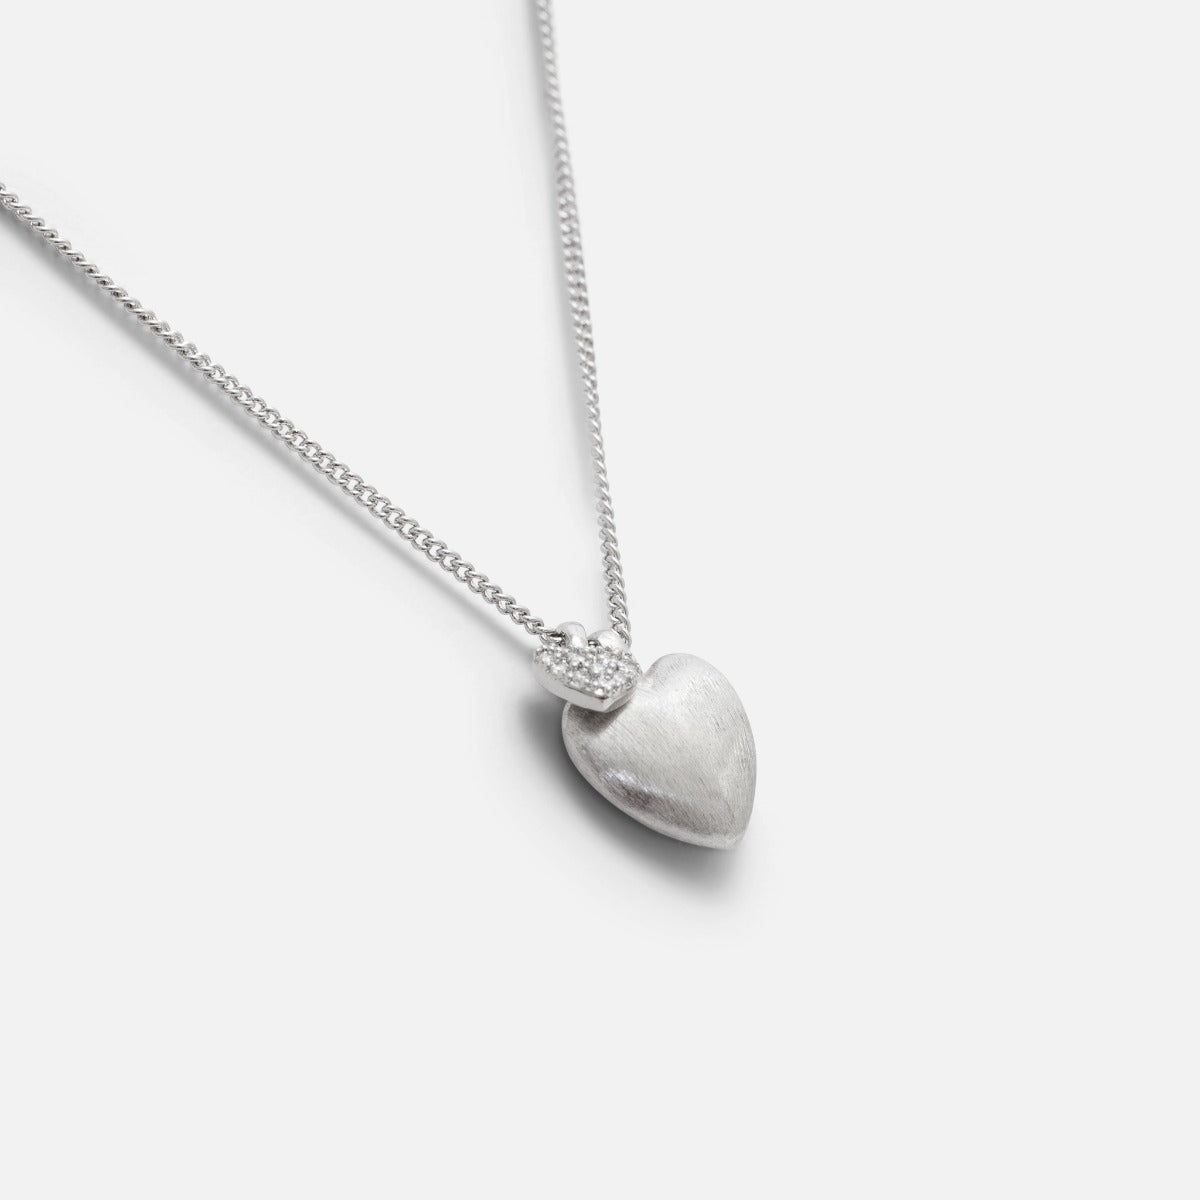 Silvered pendant with heart charms 